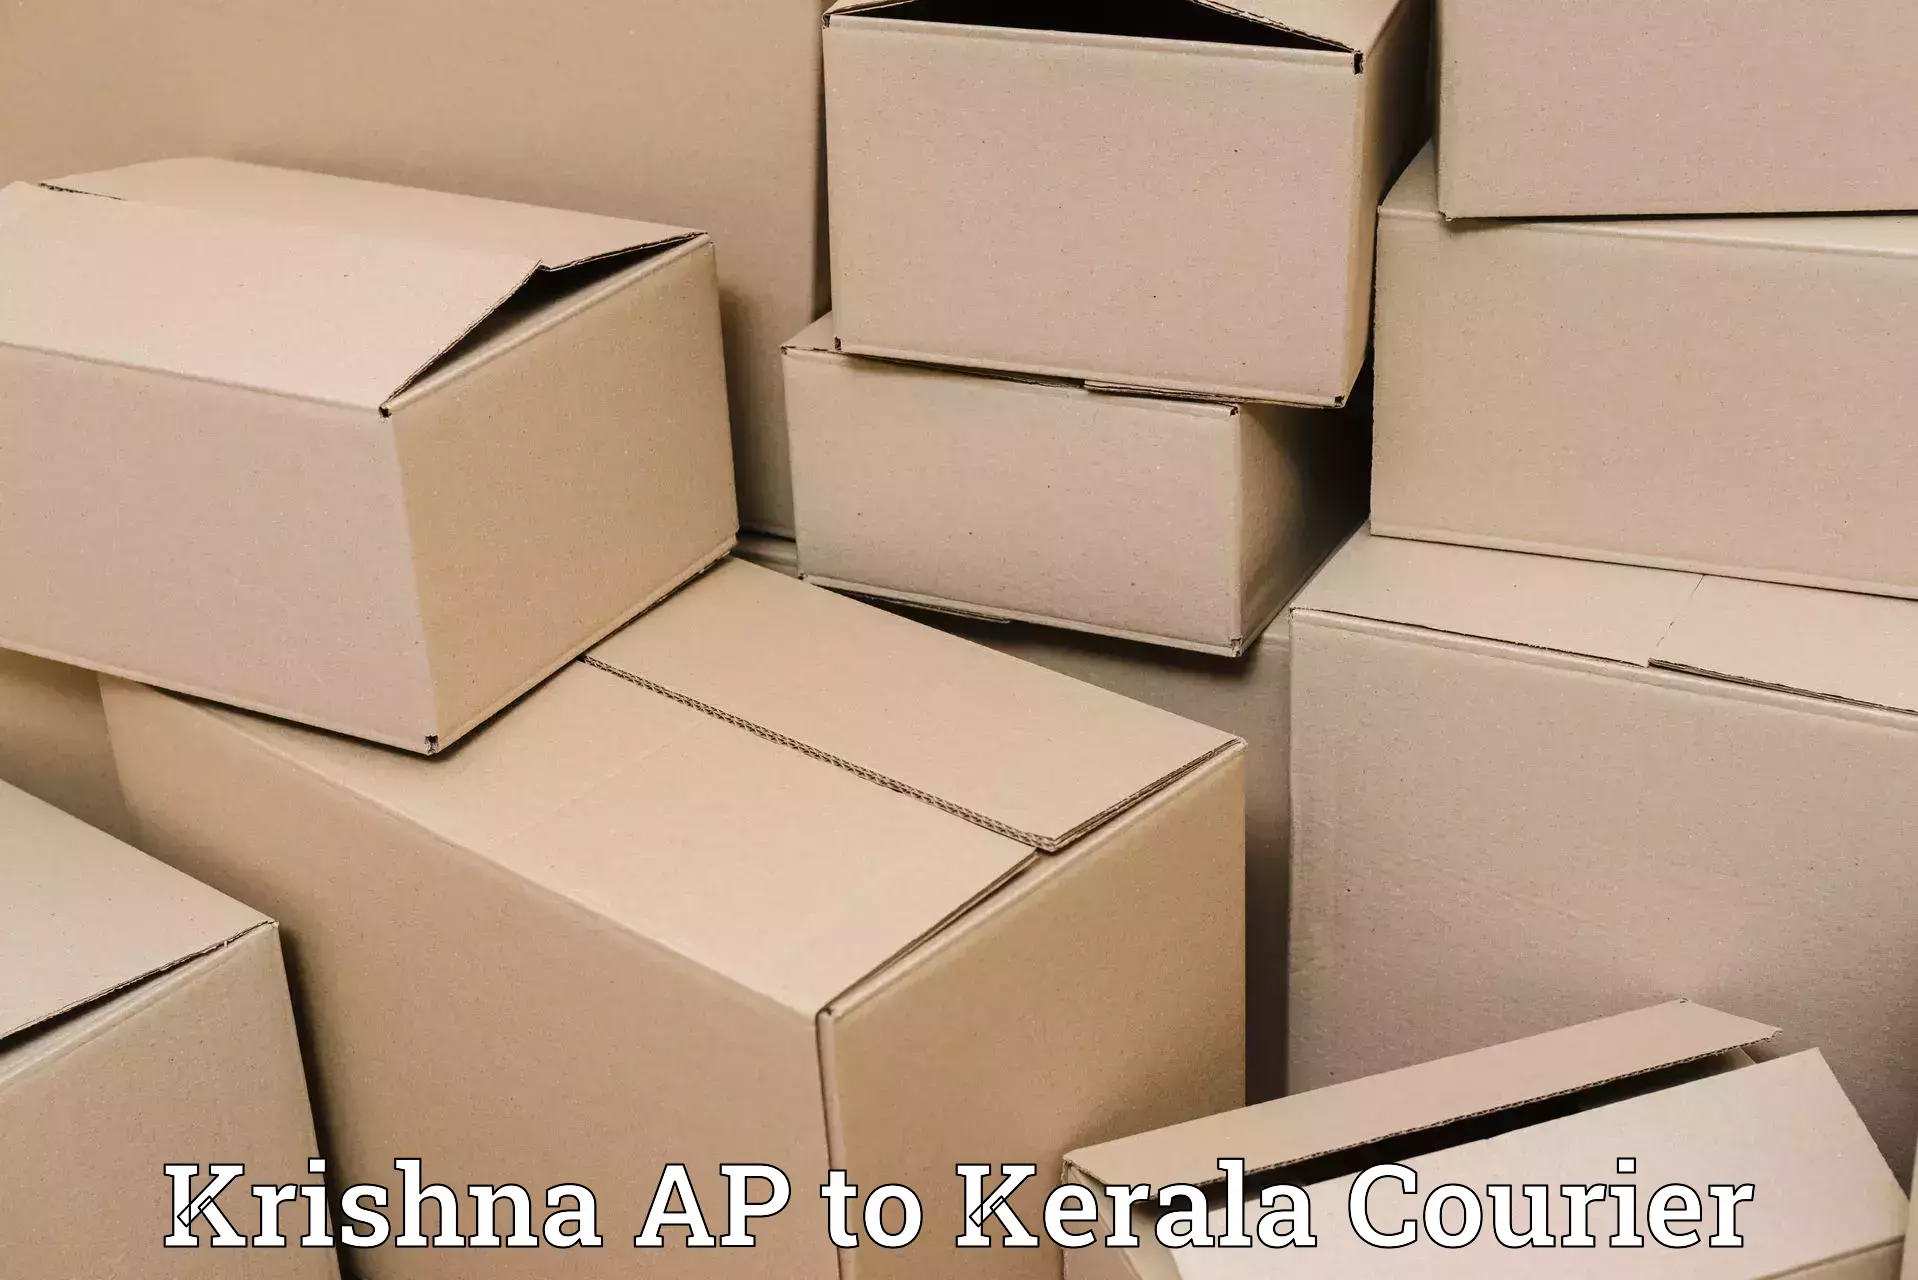 Express package services Krishna AP to Kannur